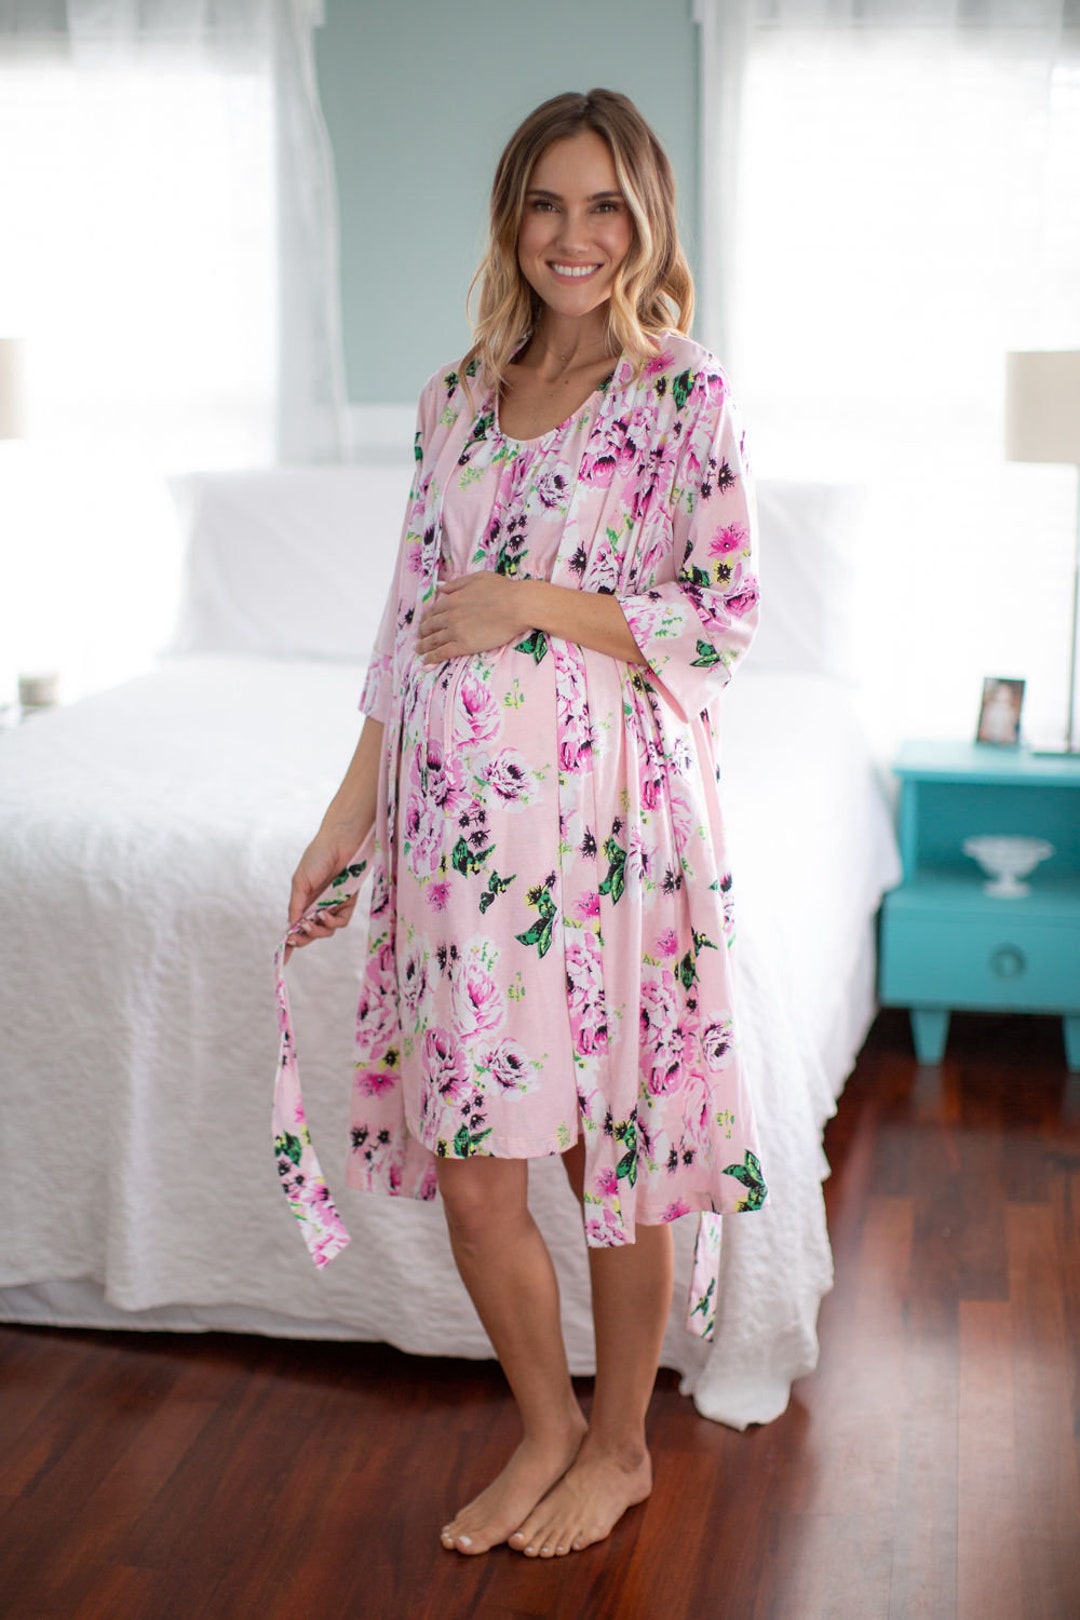 The 8 Best Gowns for Labor and Delivery of 2023